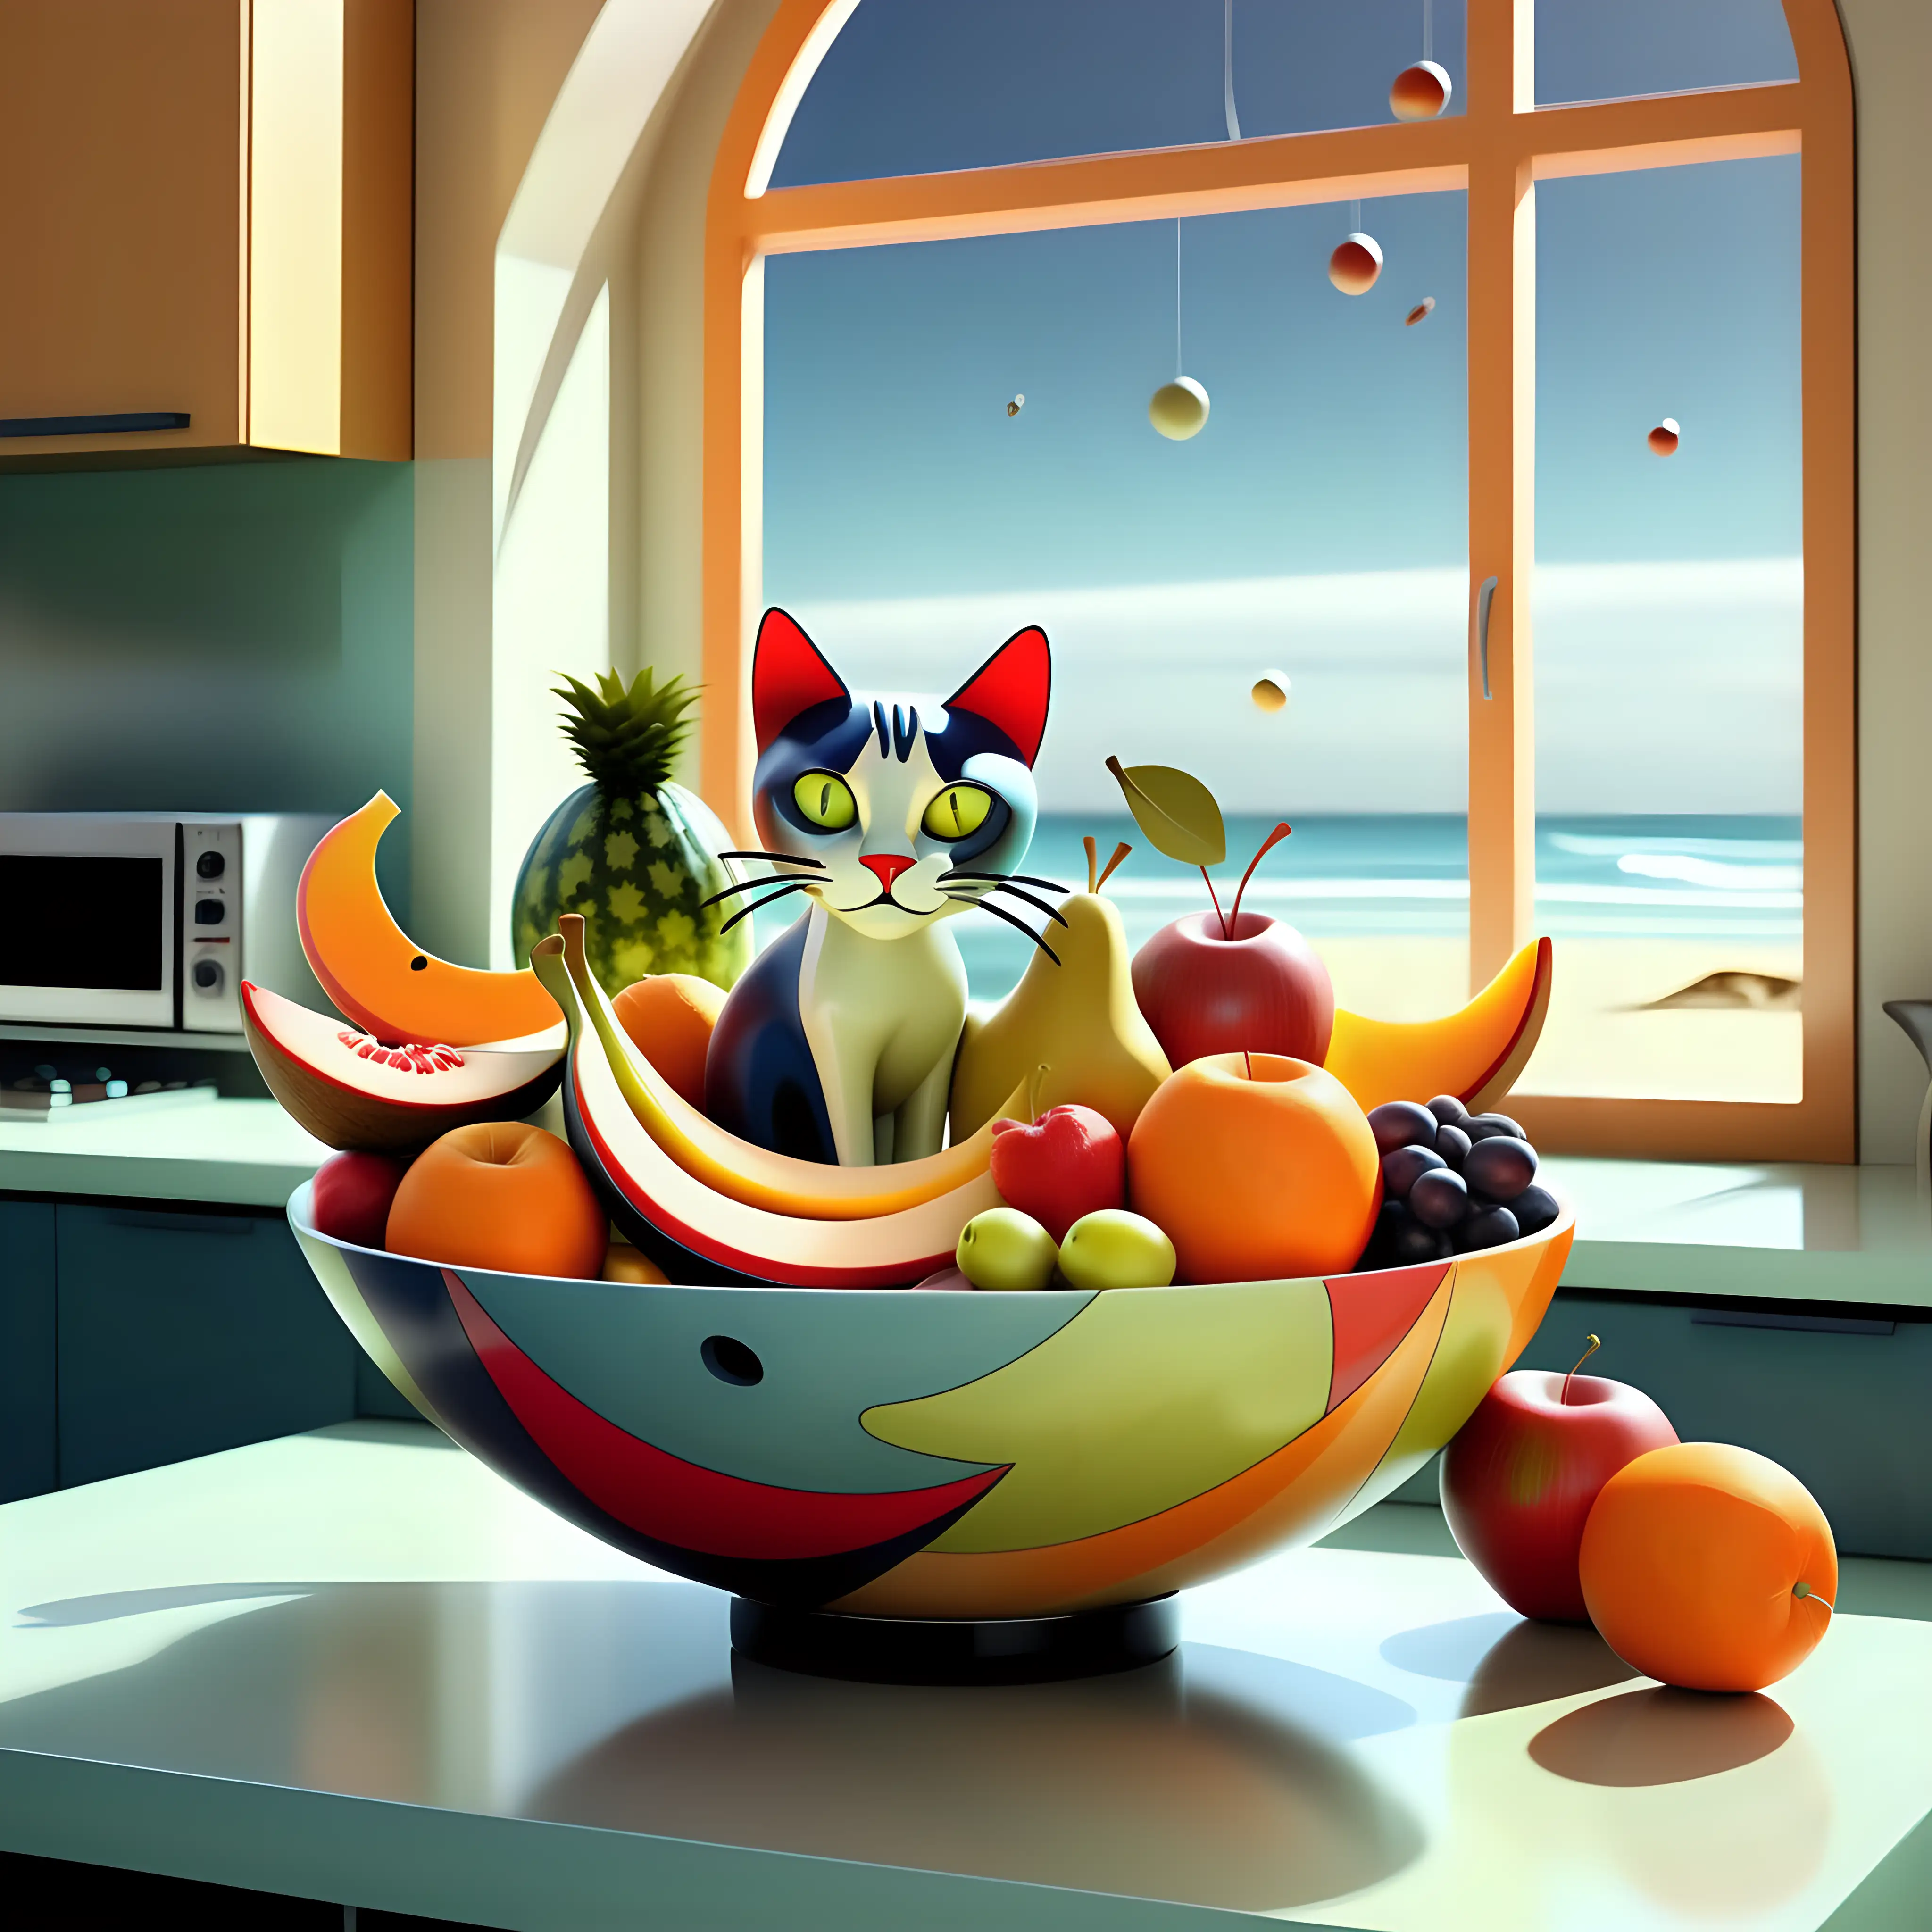 create an image of an abstract, surrealistic bowl of fruit, which is on a table in an abstract kitchen. In the kitchen space age looking cats are playing and an open window looks out onto a beach